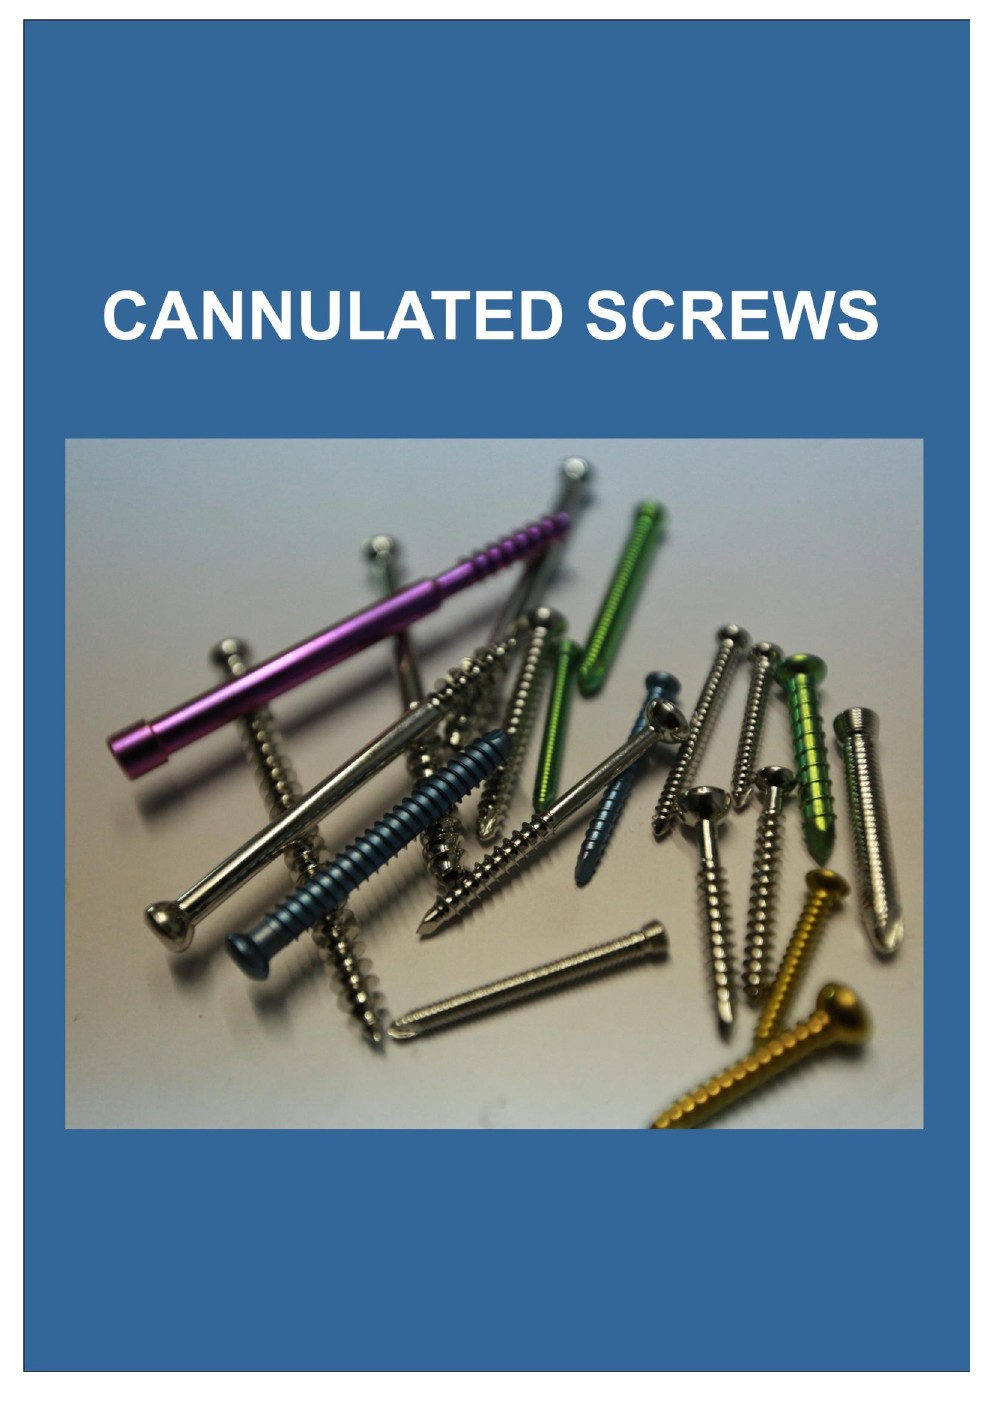 Cannulated & Compression Screws